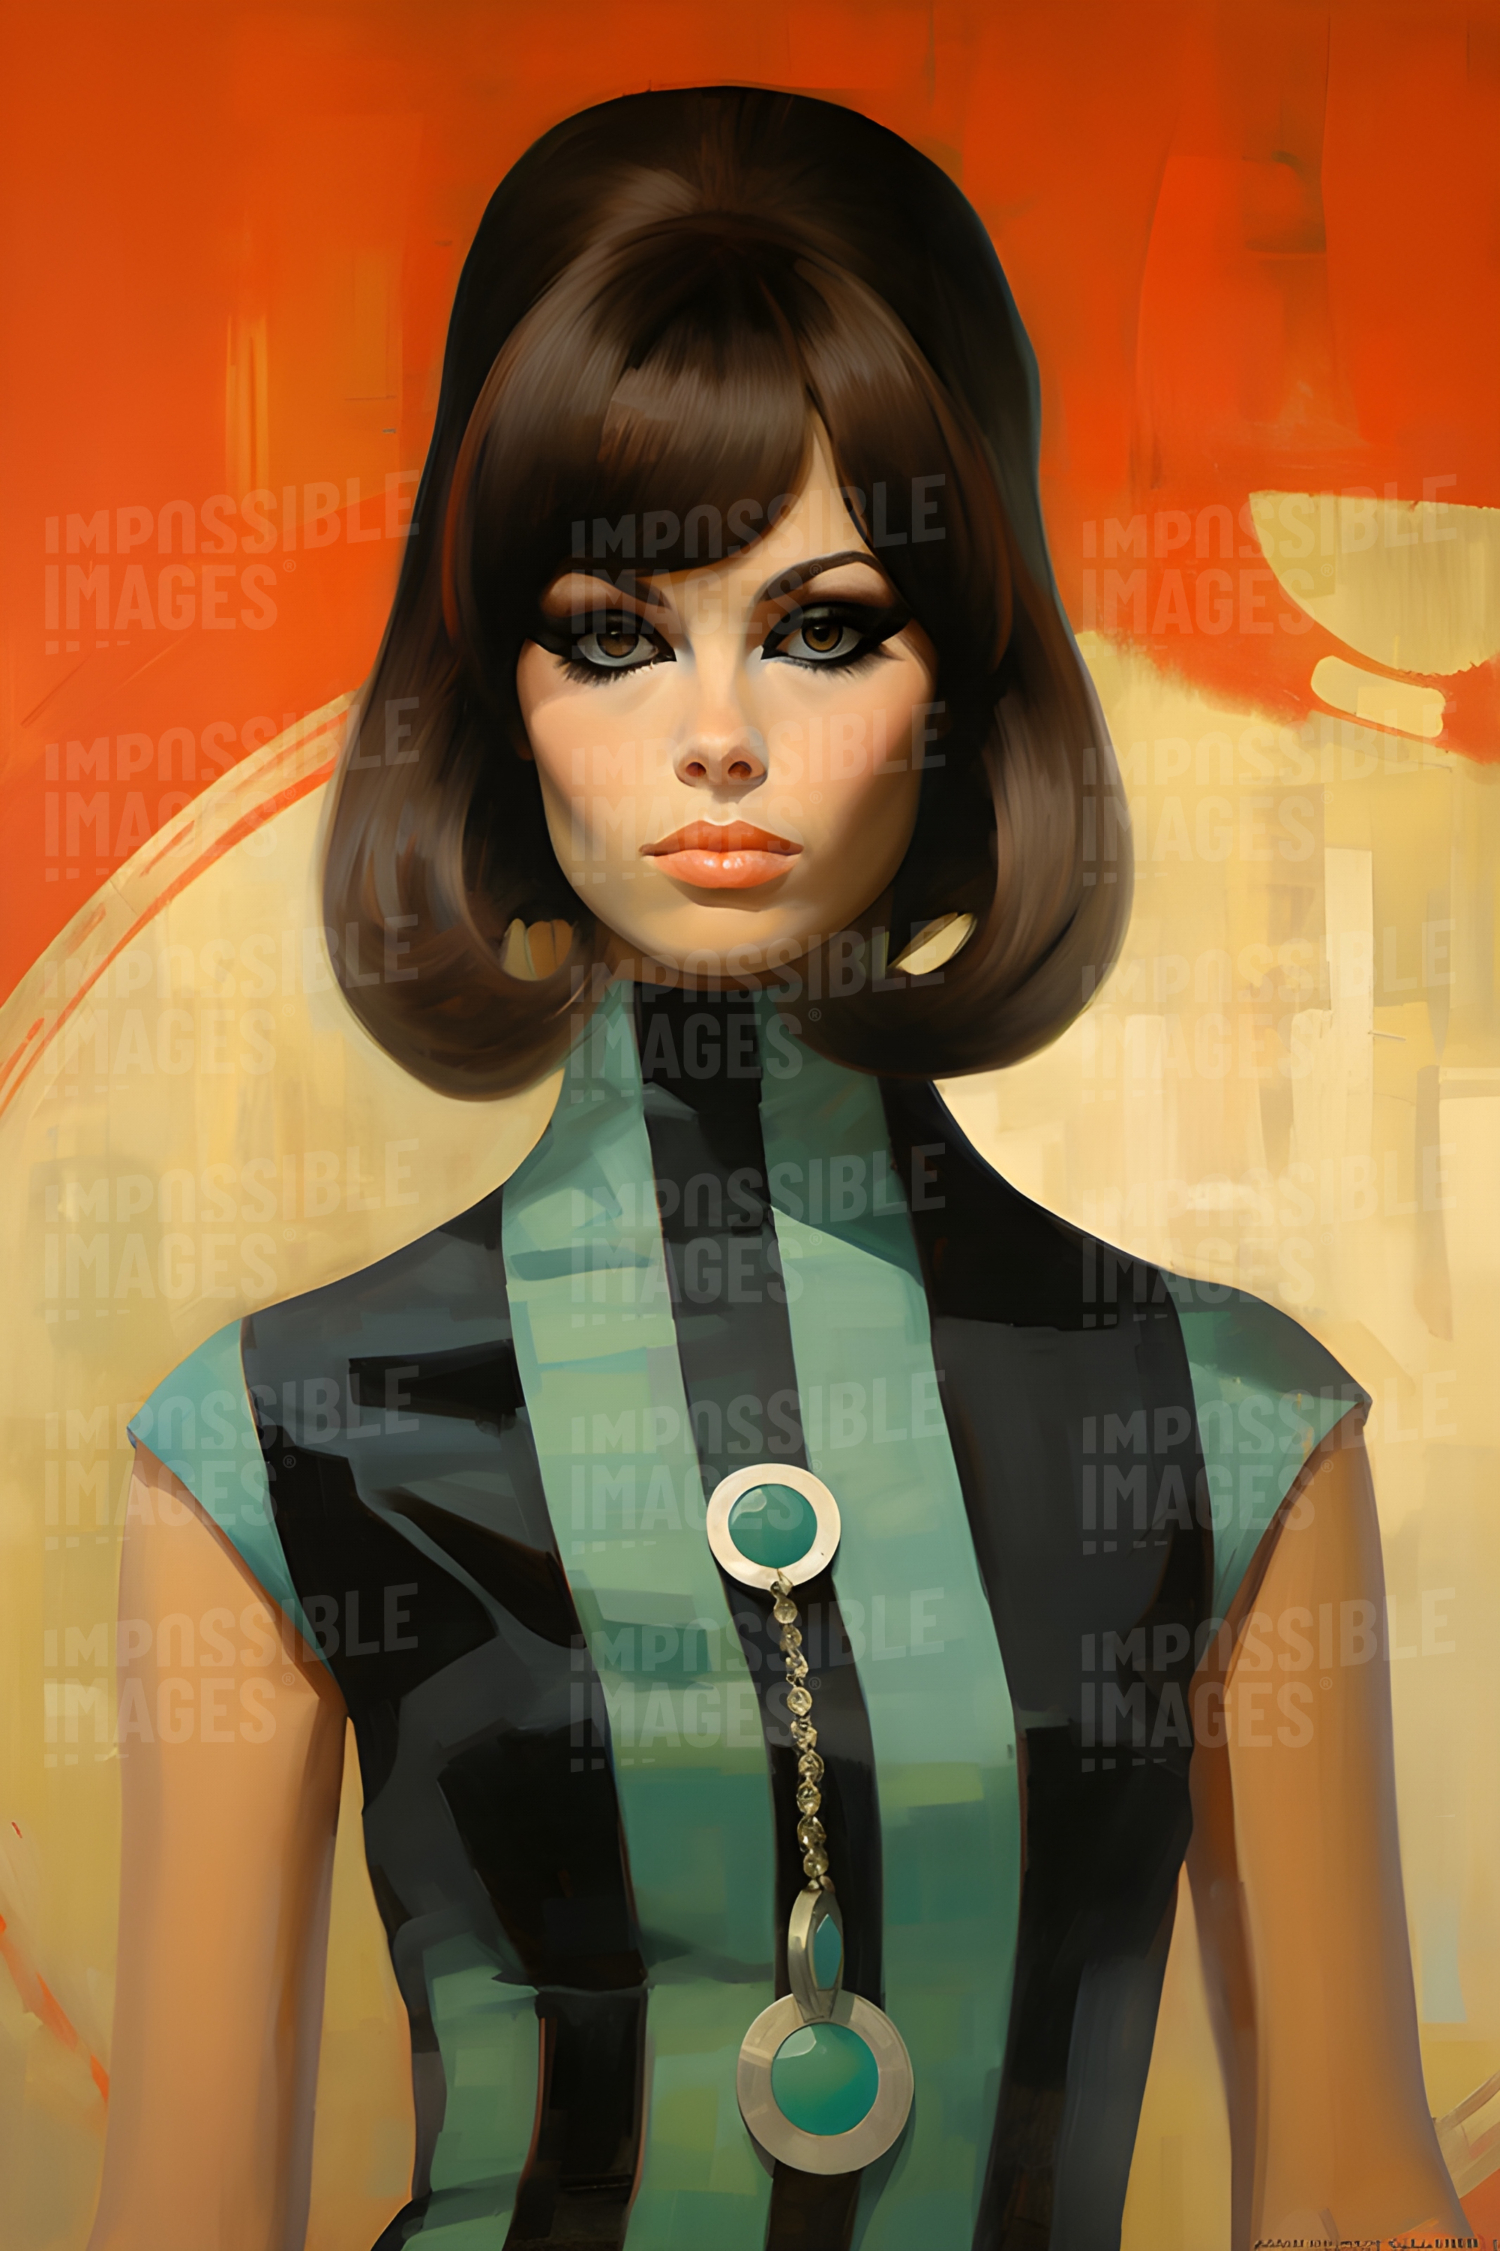 Painting of a 1960s fashion model